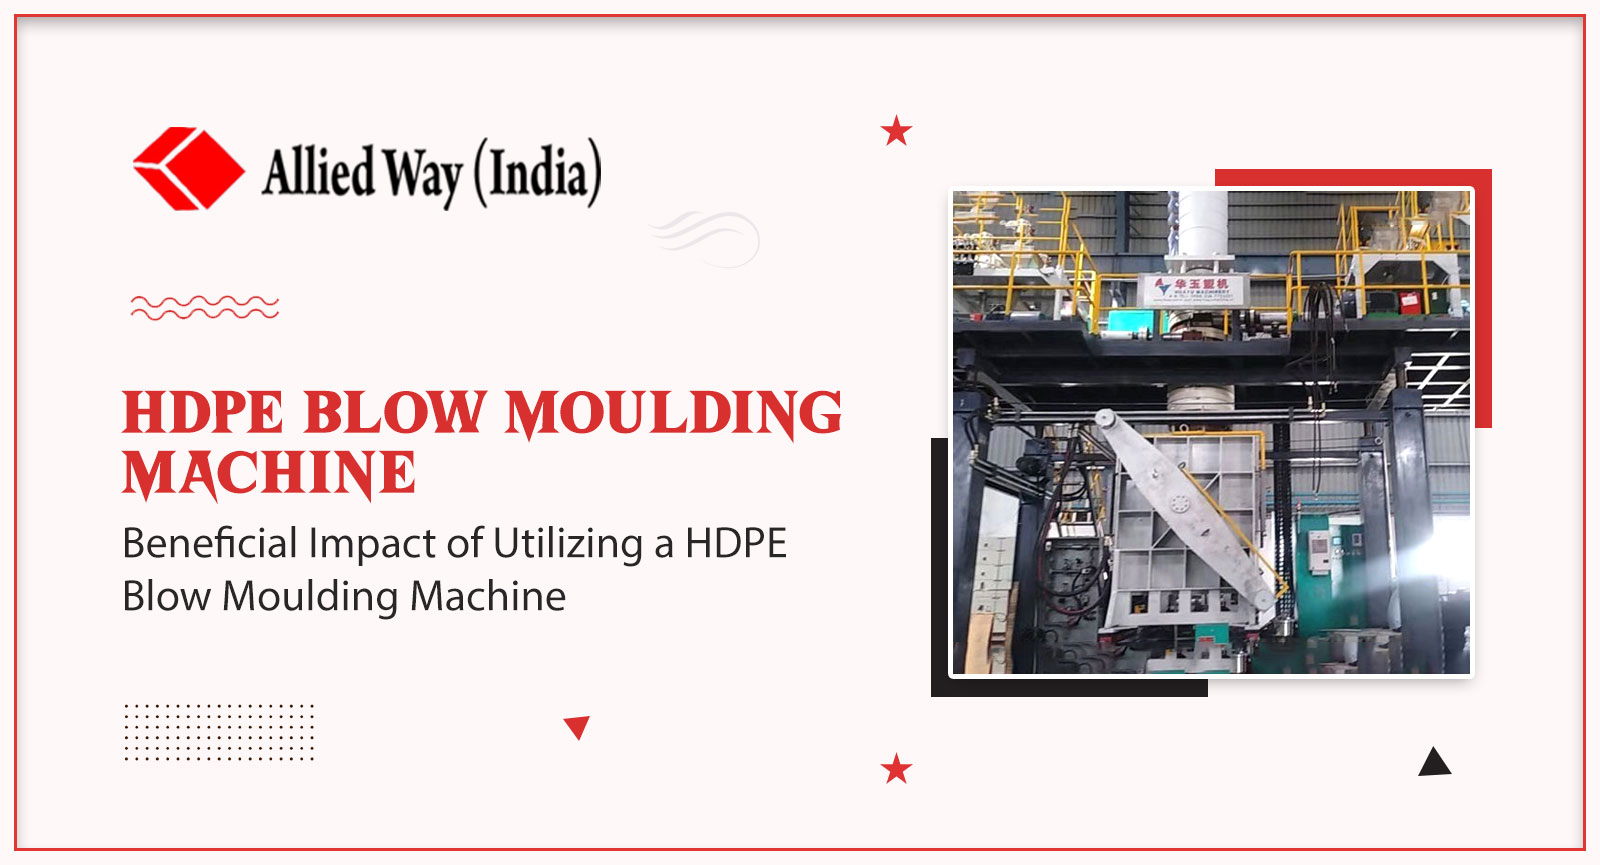 Beneficial Impact of Utilizing a HDPE Blow Moulding Machine, Allied Way (India)